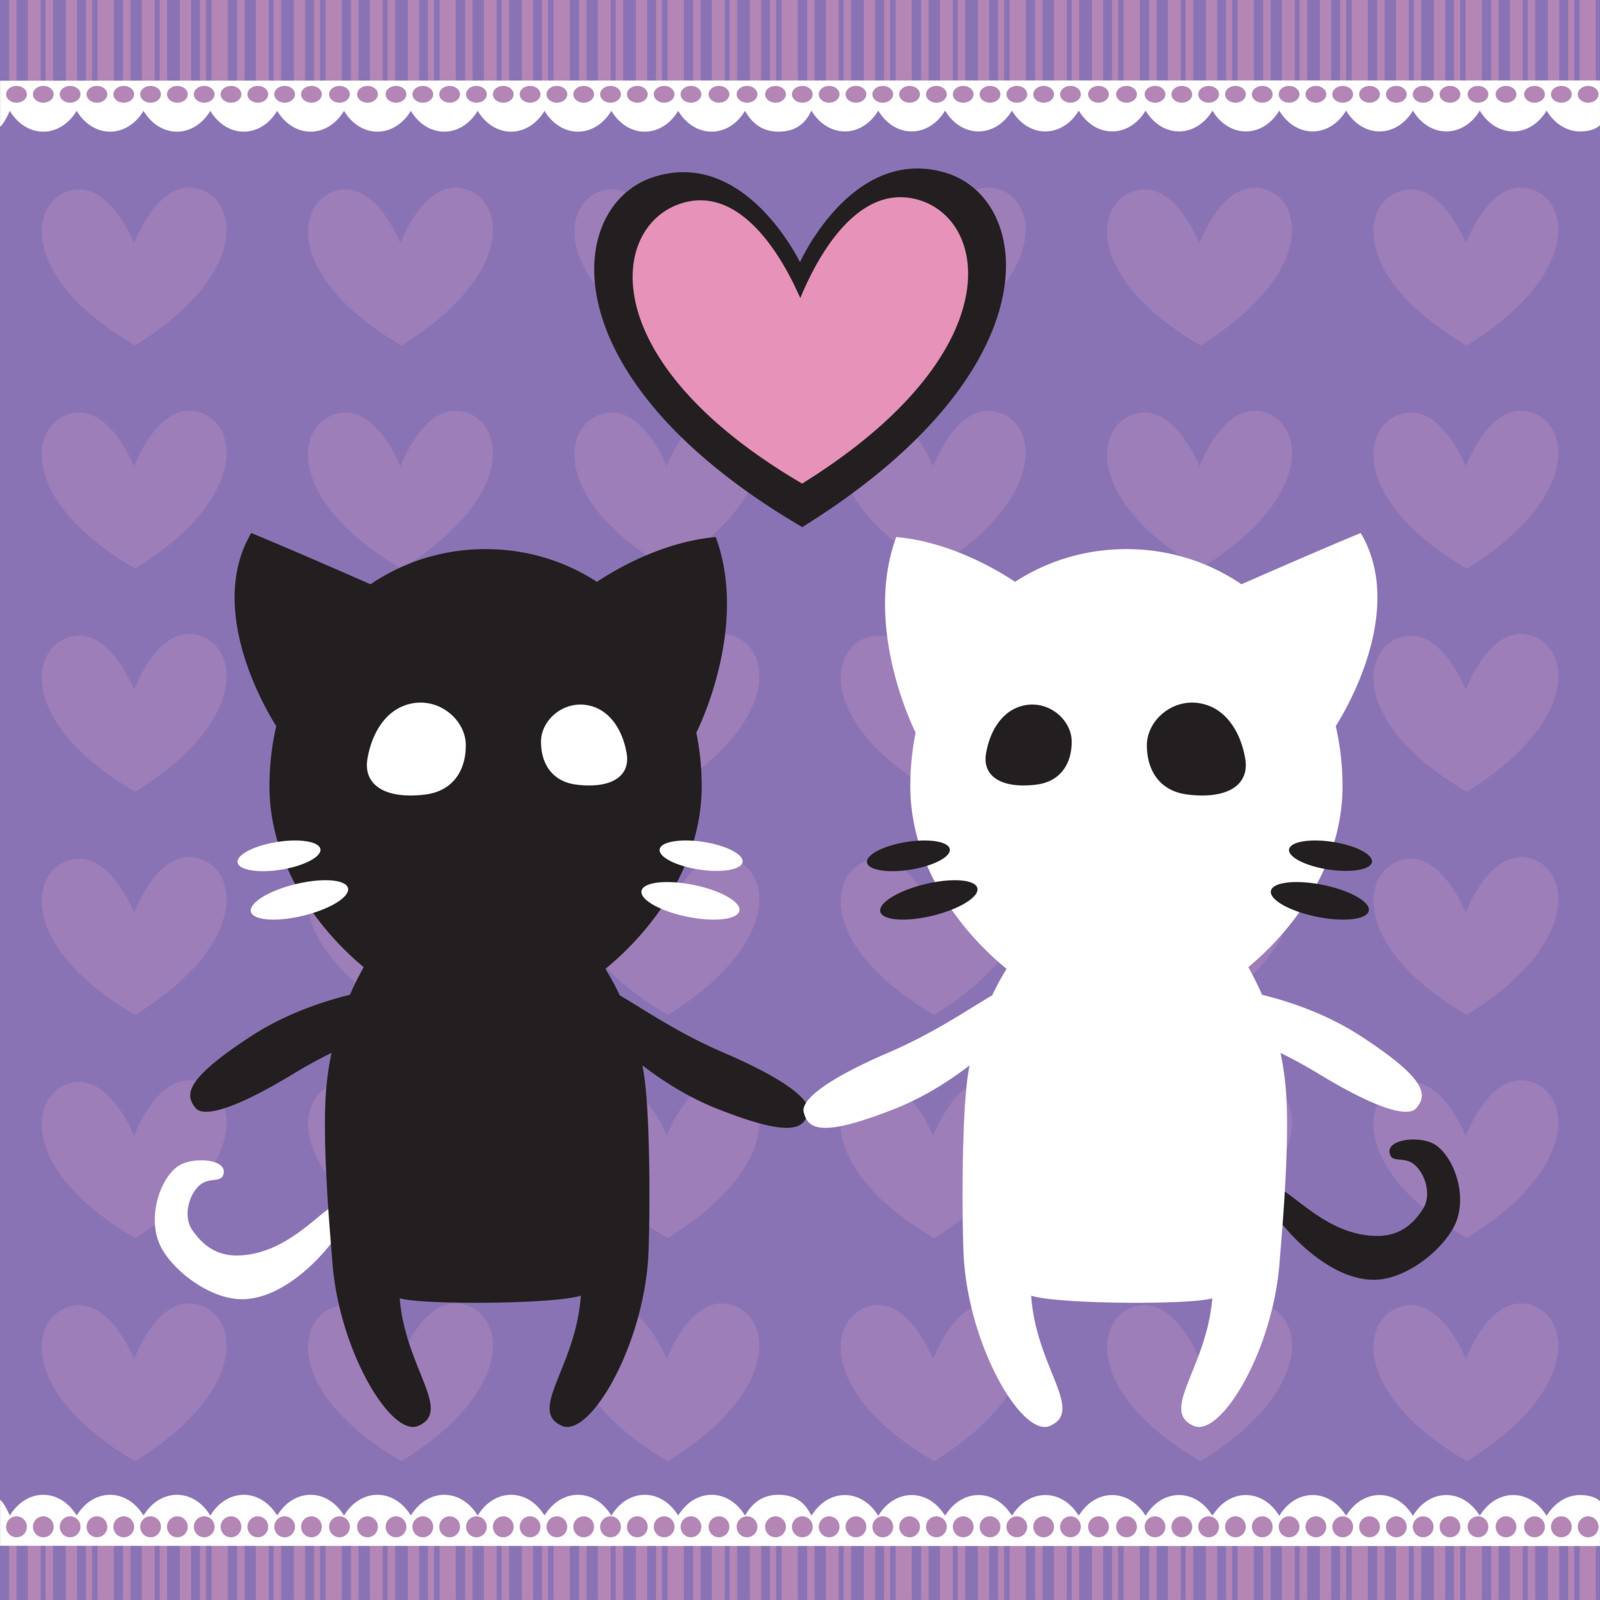 Two cats in love. Vector illustration.